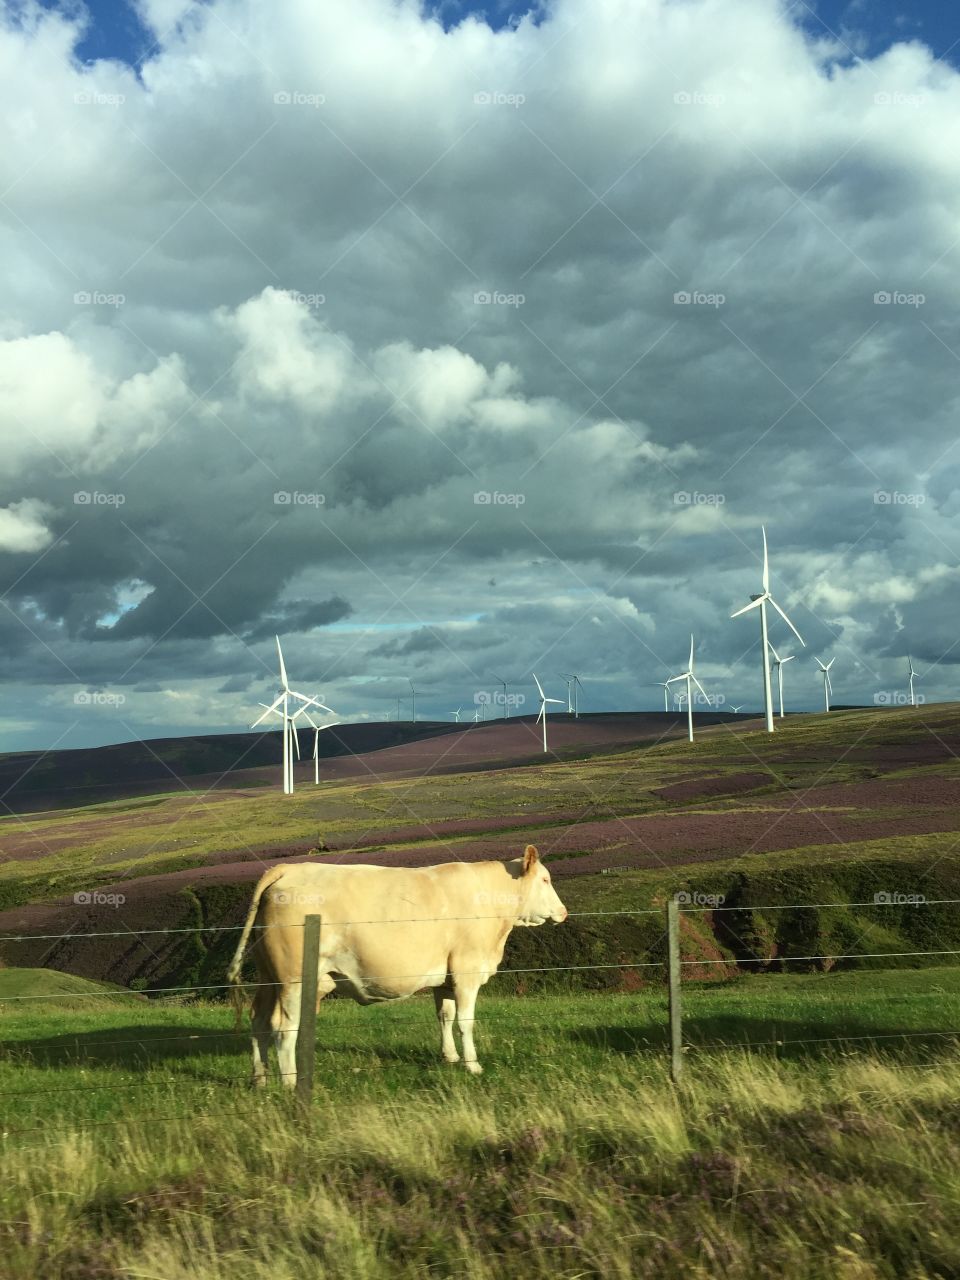 A cow and some windmills